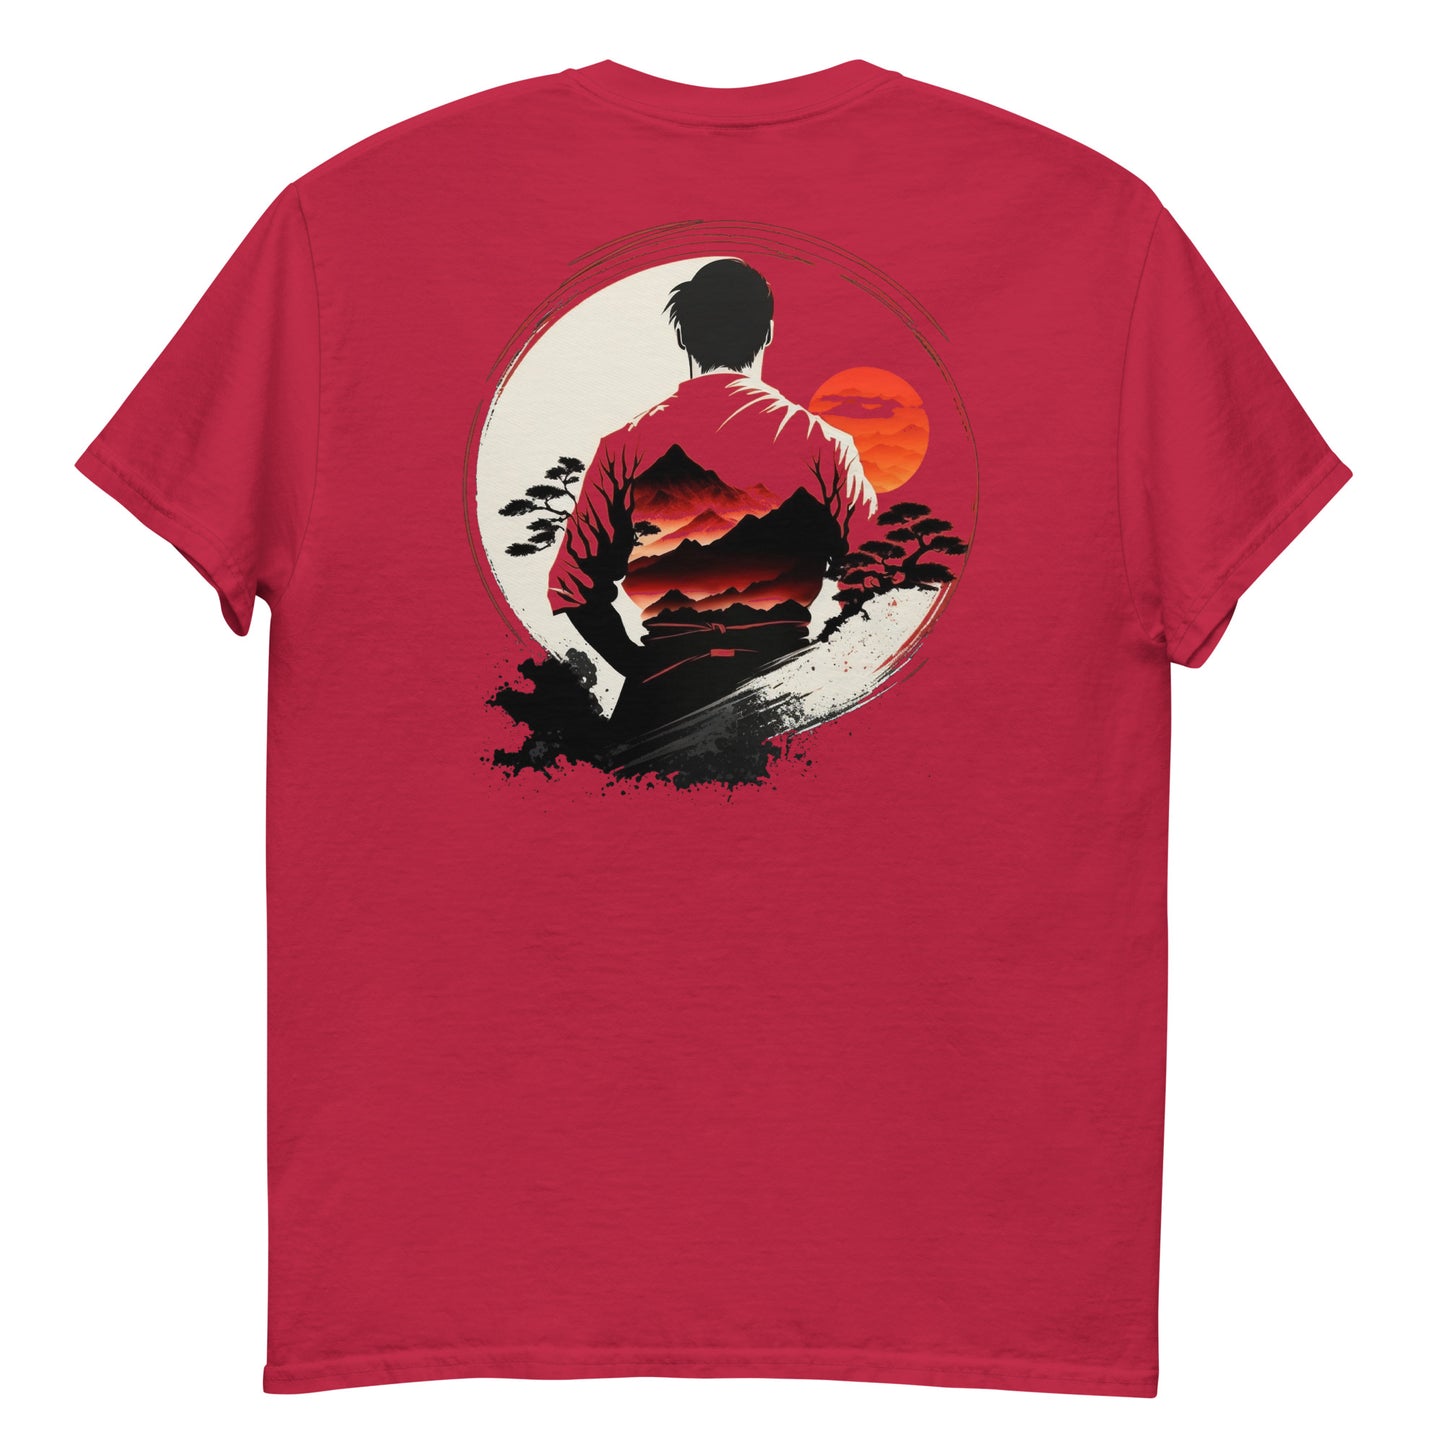 wK Limited Edition "Ronin" Tee